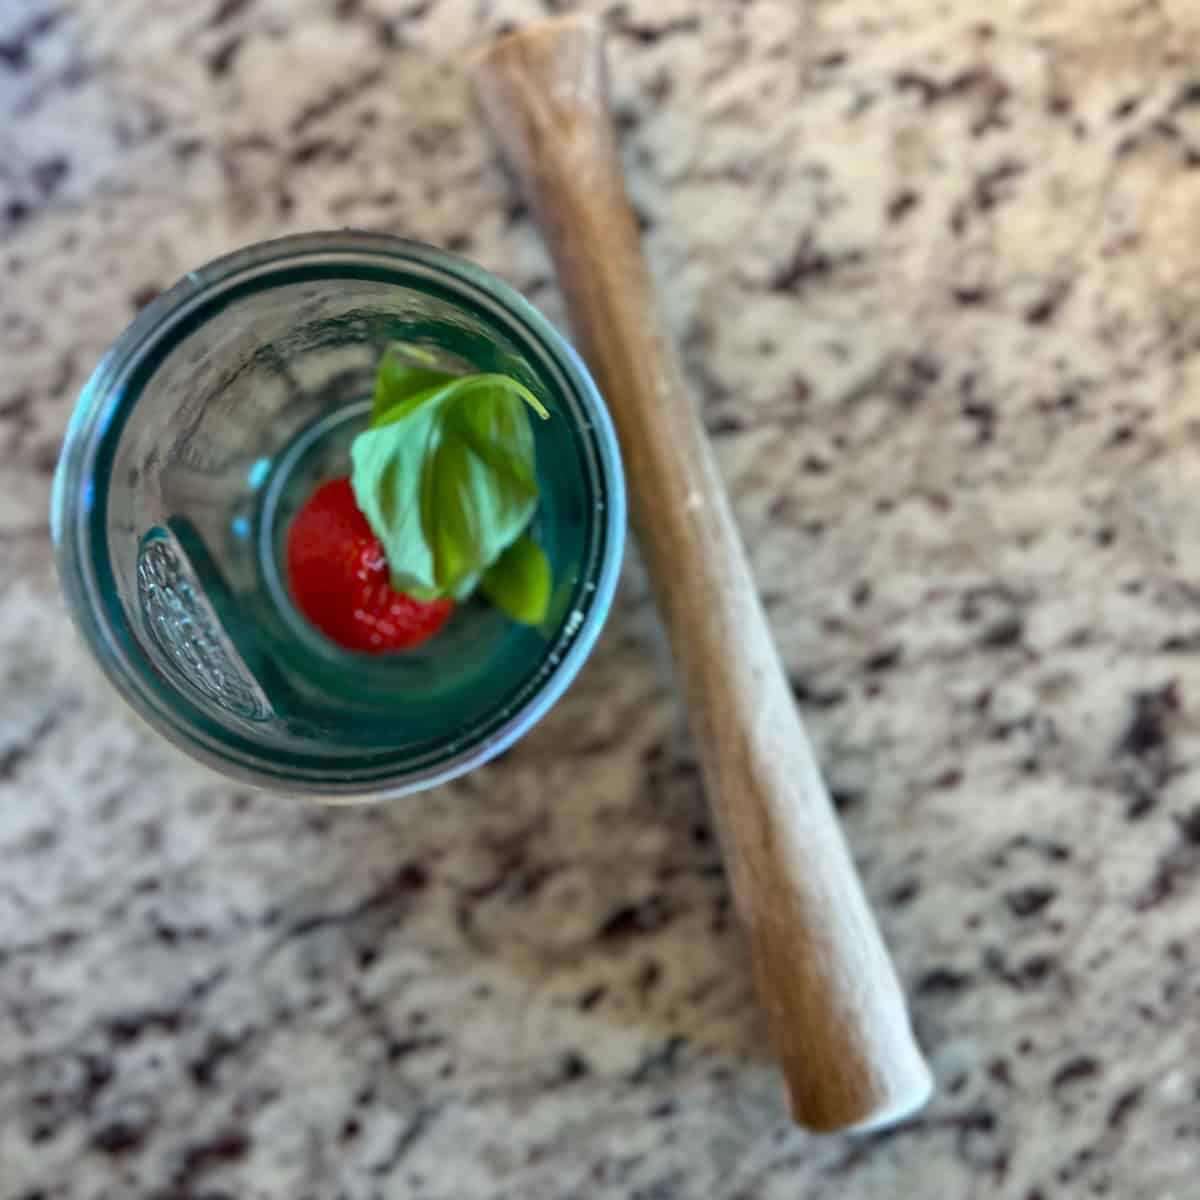 top view of a glass with fresh strawberry and basil leaves inside and wooden muddle on the side